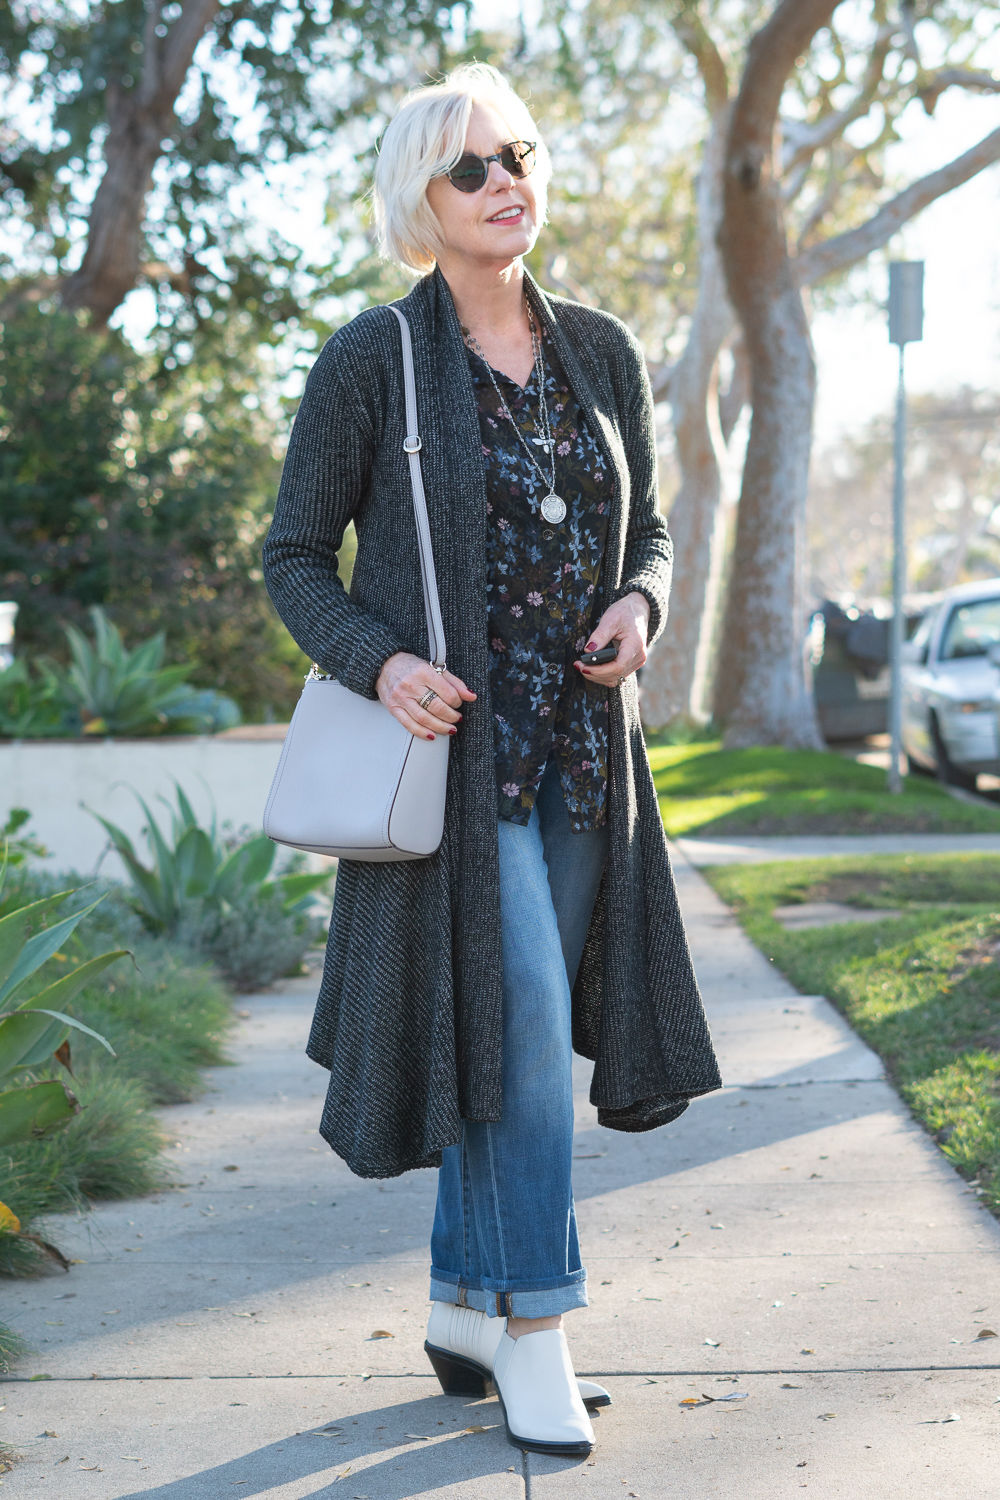 Style blogger Susan B. wears separates from the Cabi fall collection. Duster cardigan, floral blouse and straight leg jeans. More at une femme d'un certain age.